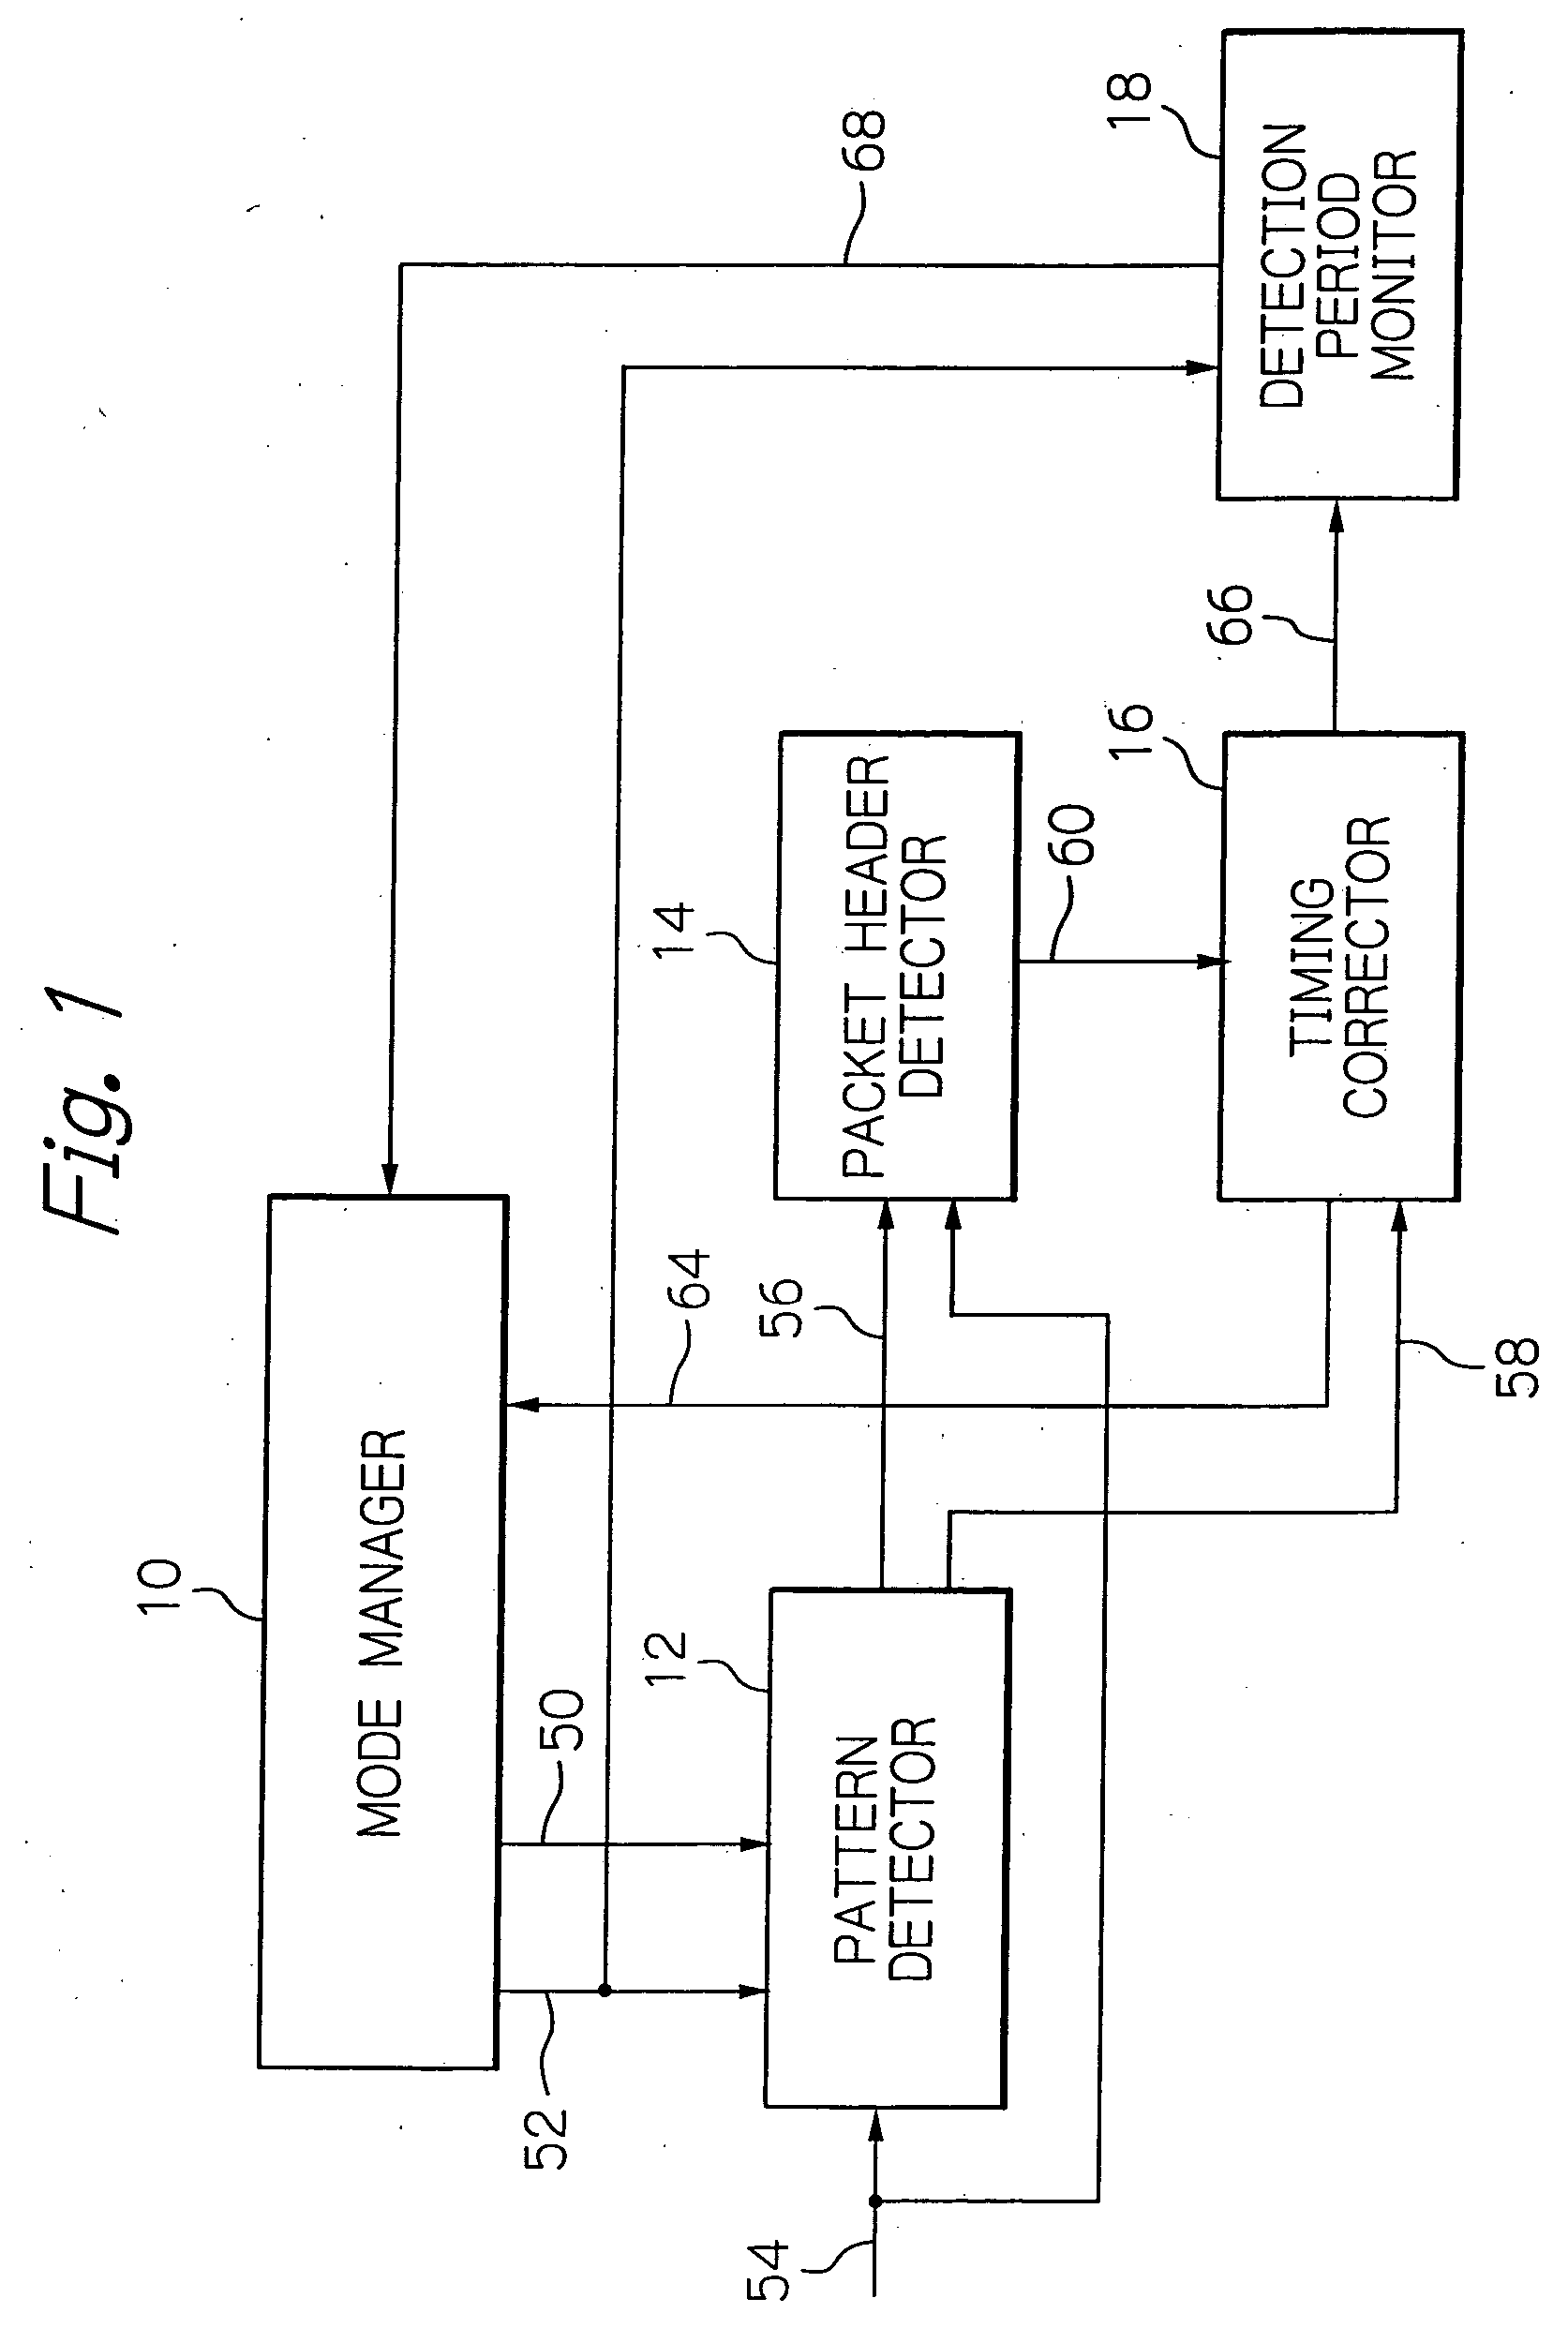 Device for preventing erroneous synchronization in wireless communication apparatus